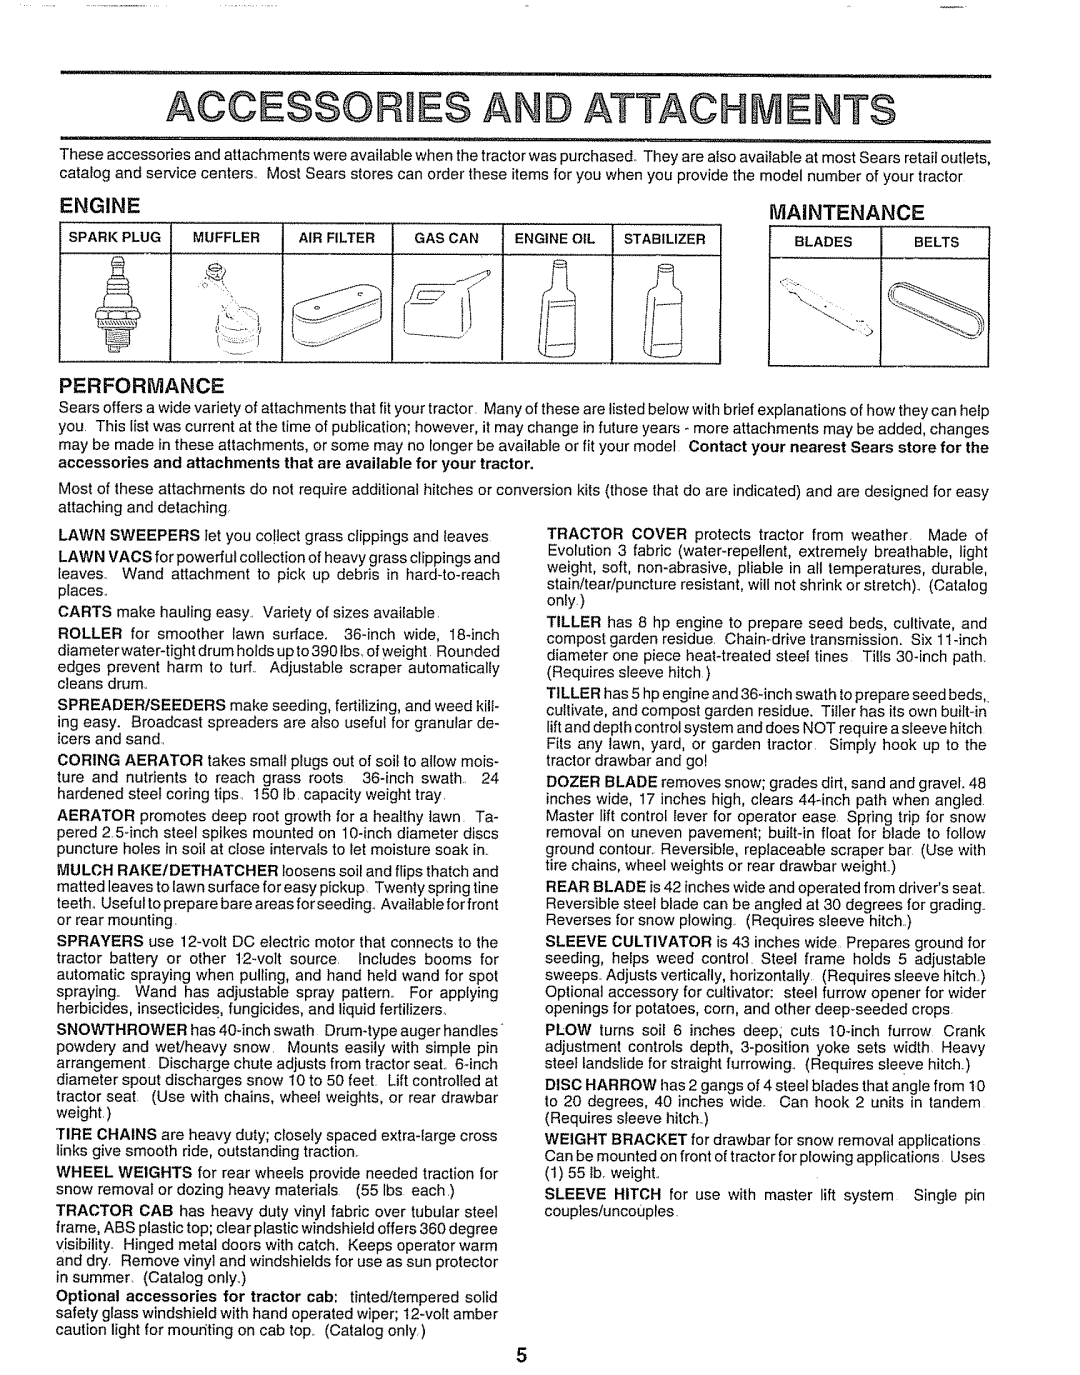 Sears 917.25597 owner manual Aooesso Ies And Attach Ents, Maintenance, Performance 